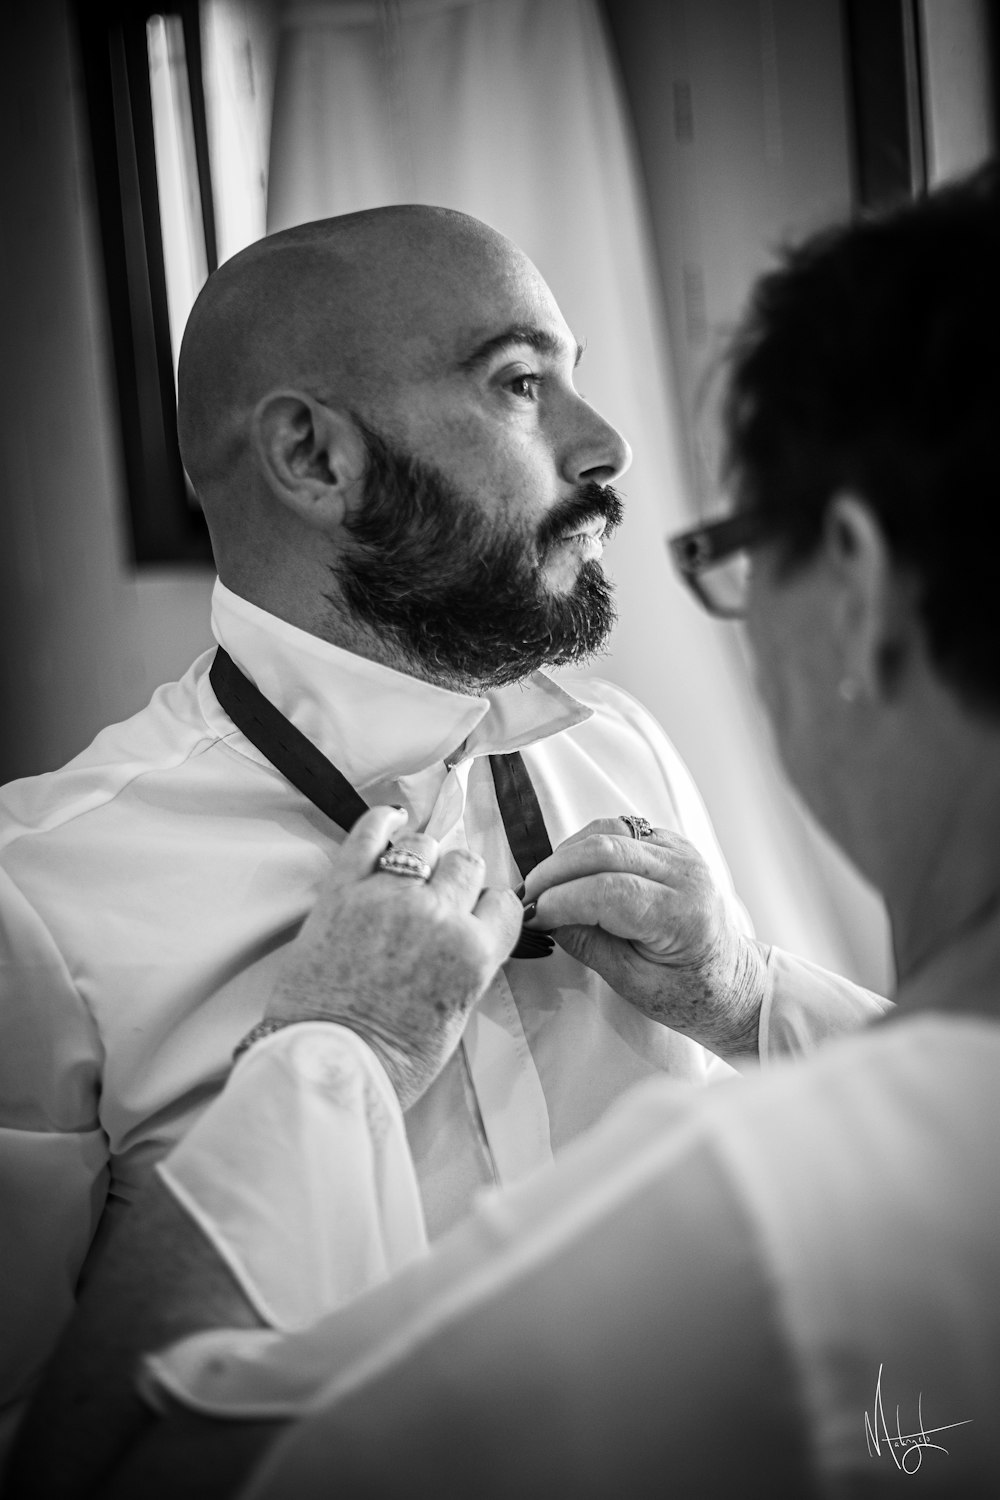 a man with a beard is fixing his tie